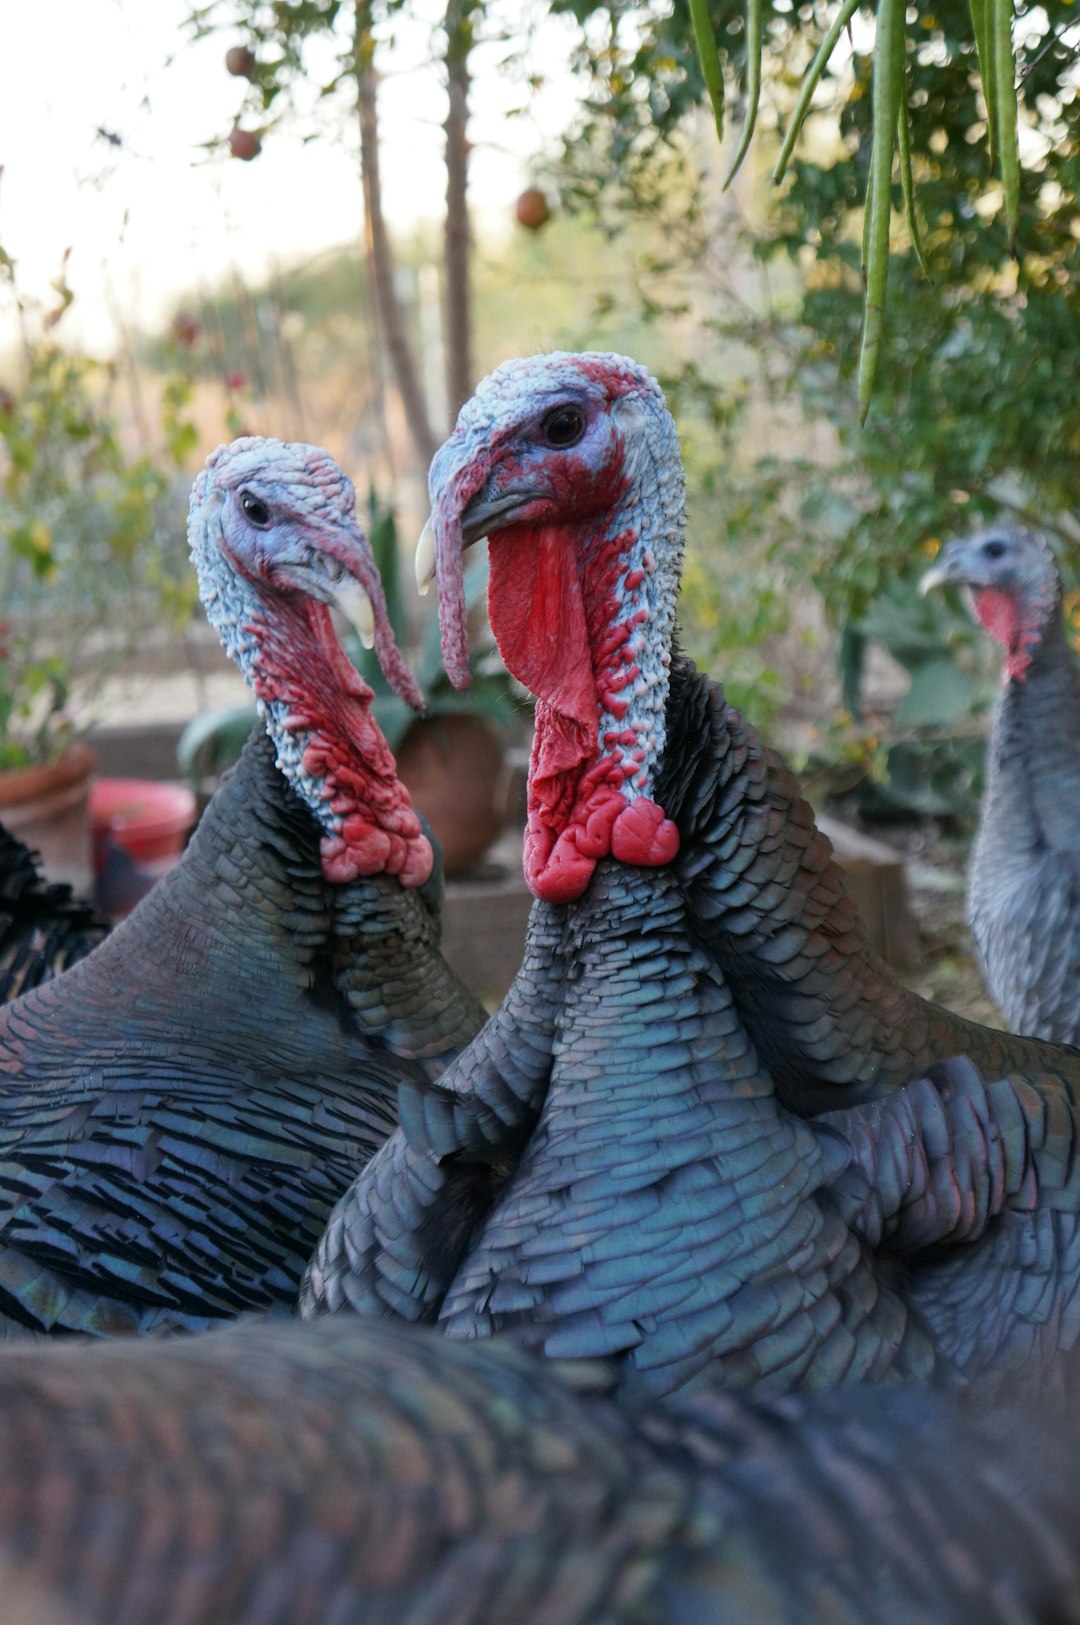 herd of turkey animal surrounded by forest